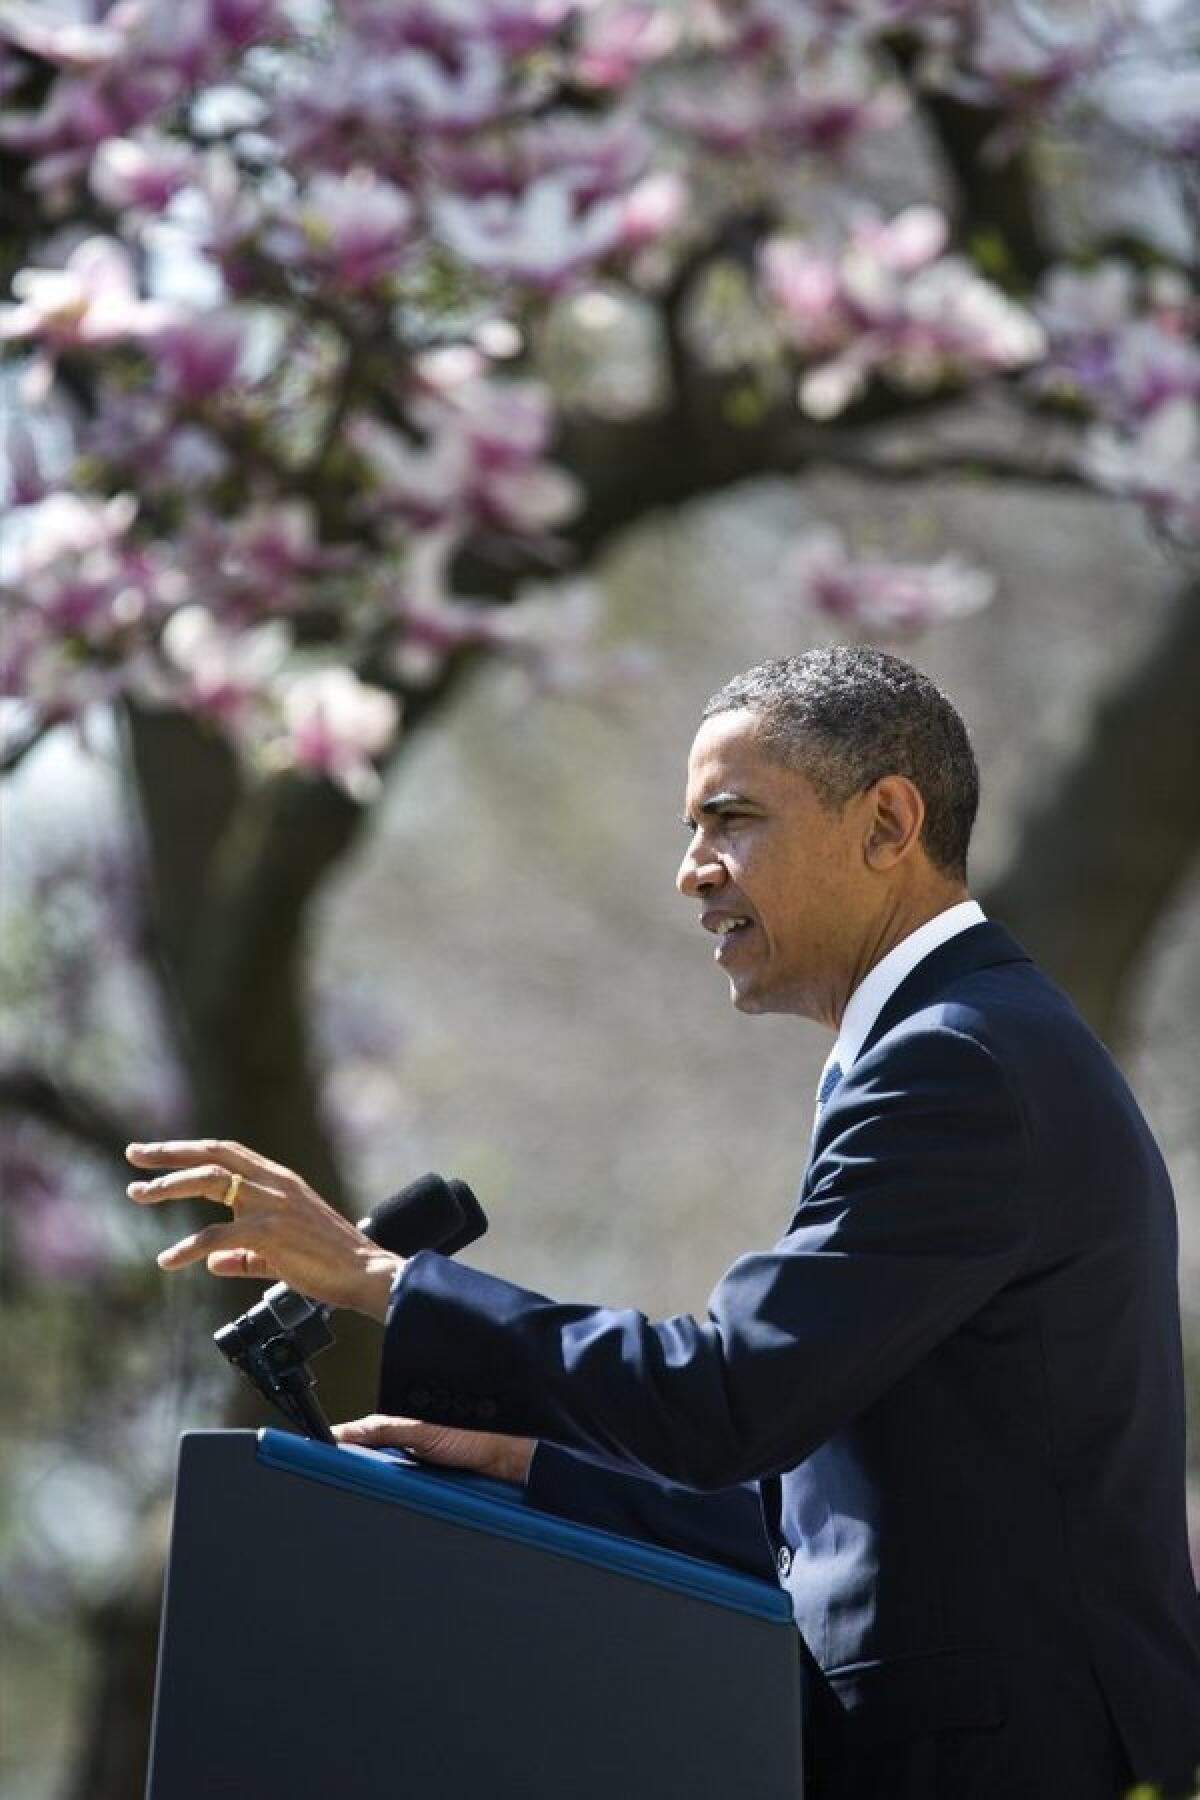 President Obama details his budget proposal in the White House Rose Garden in Washington, D.C.